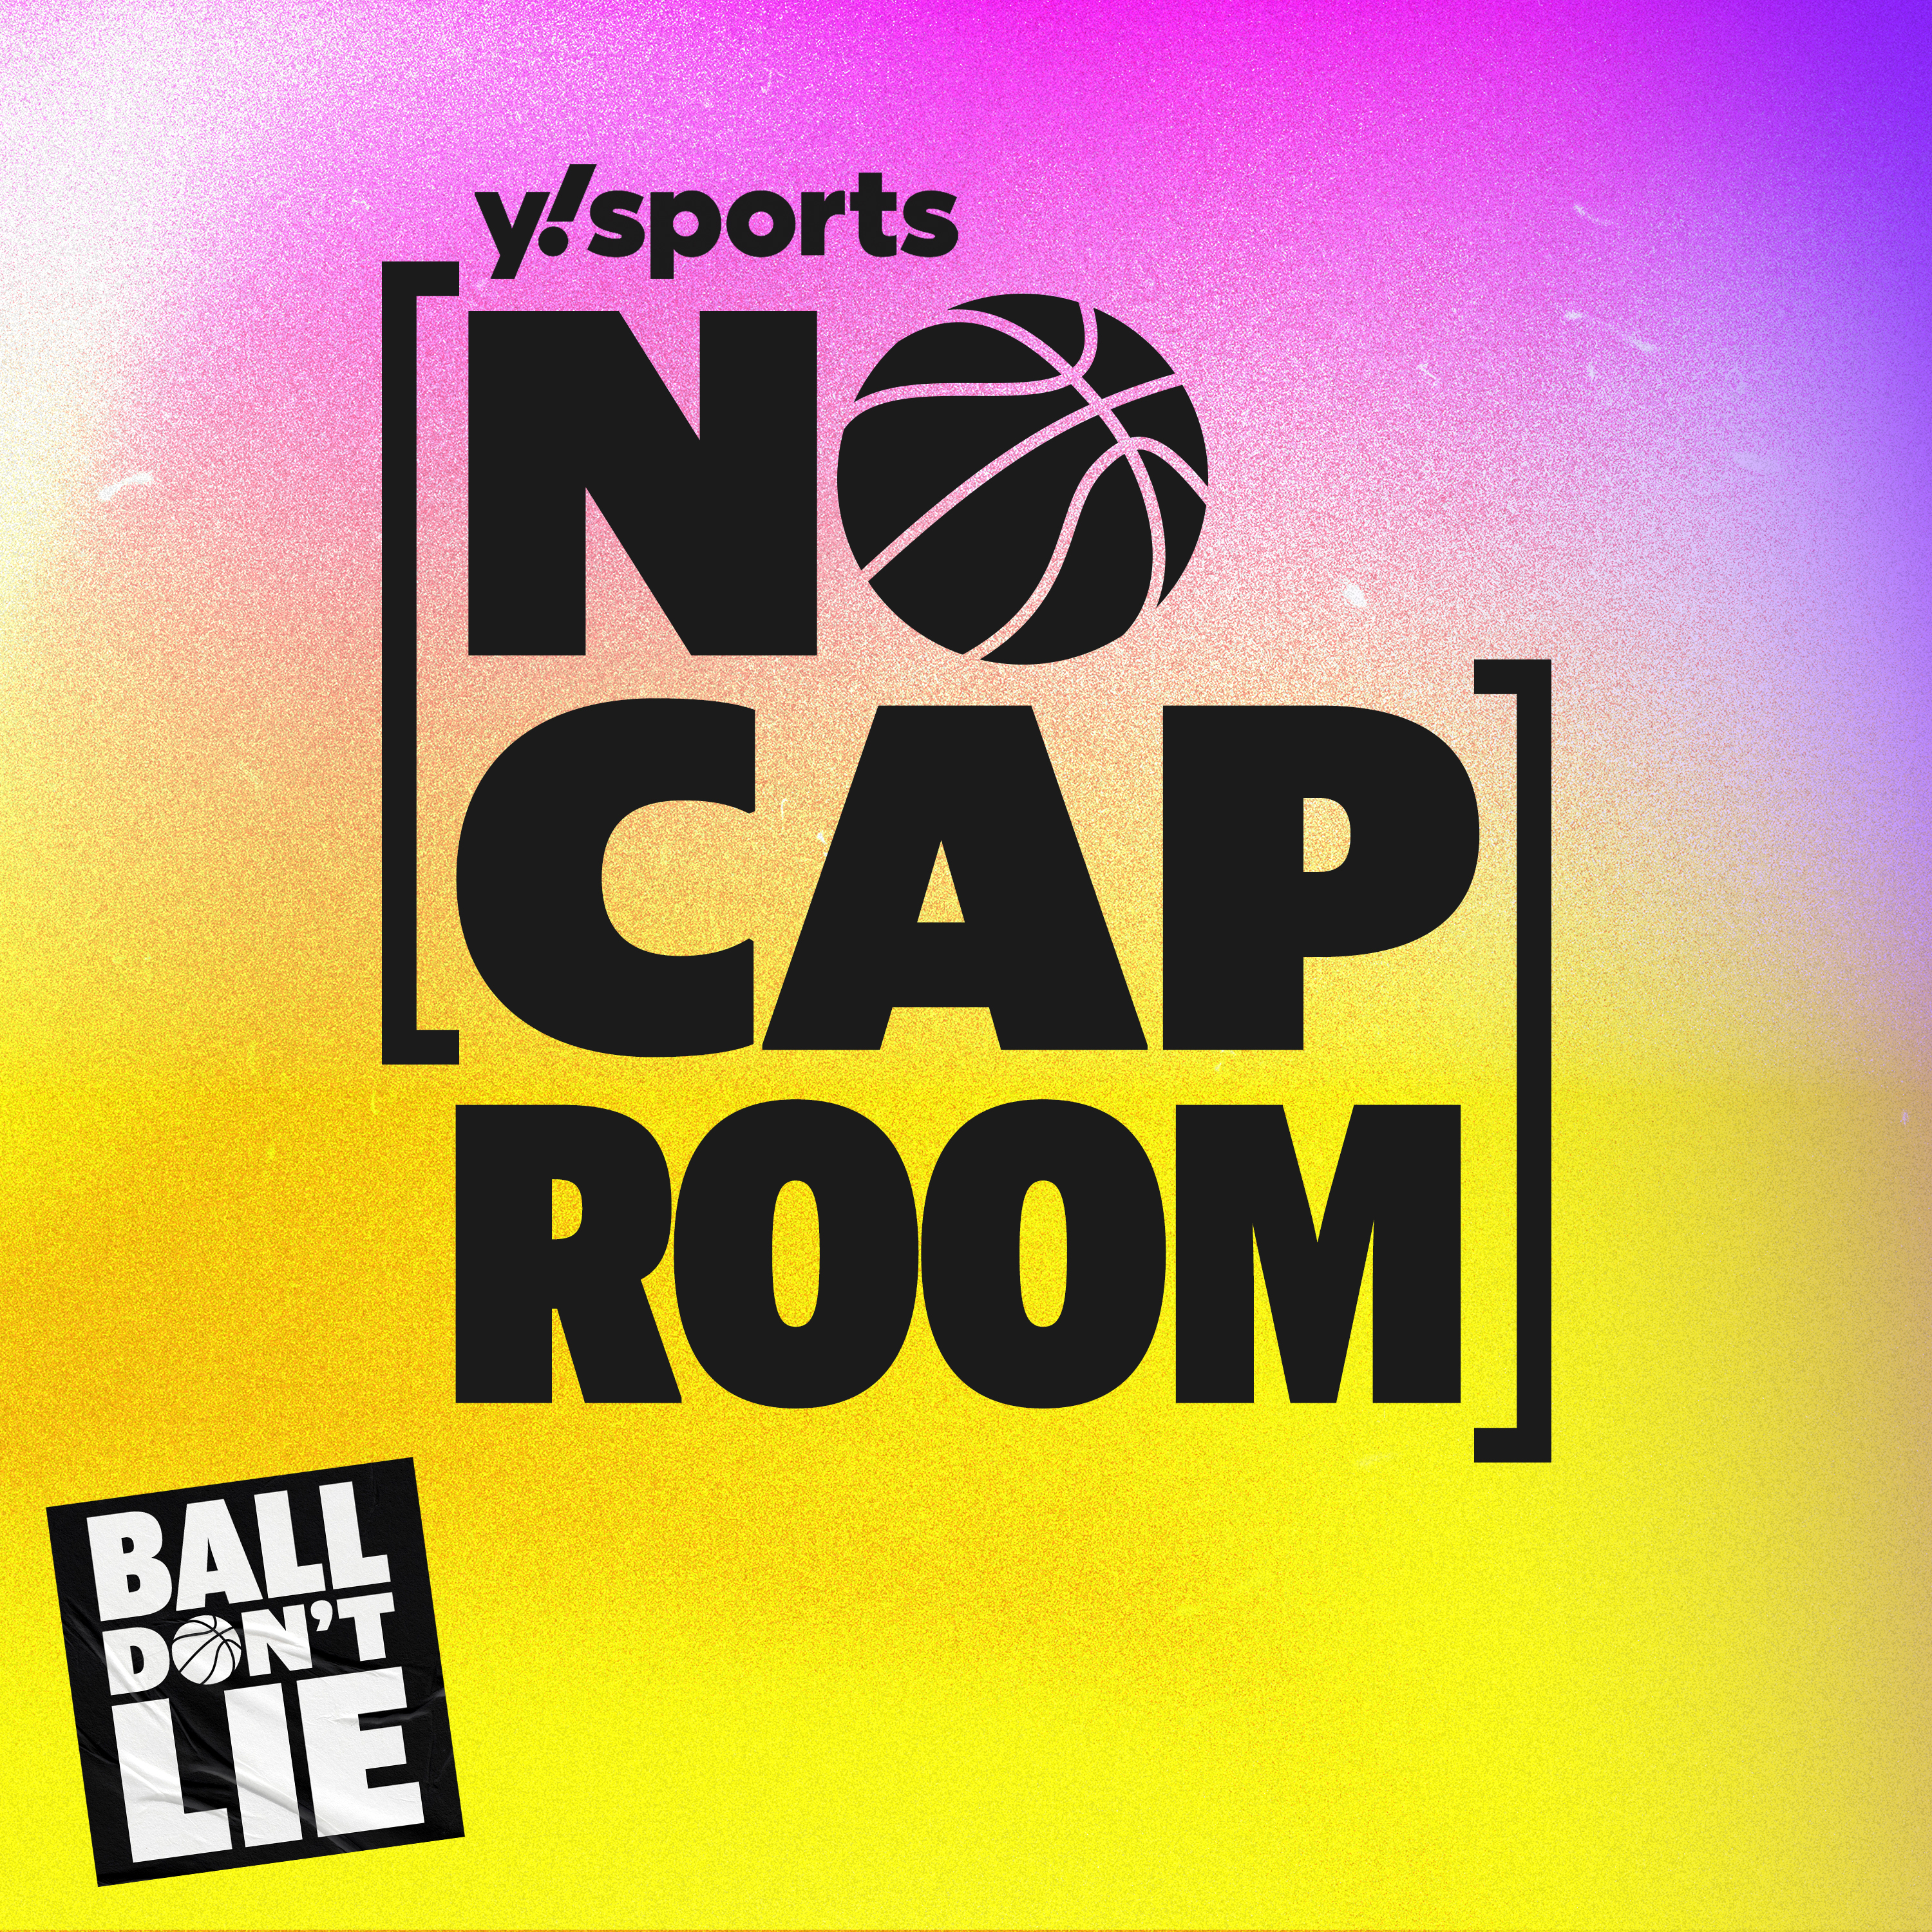 Jrue Holiday's contract extension, Paolo Banchero comps & playoff legacies on the line | No Cap Room